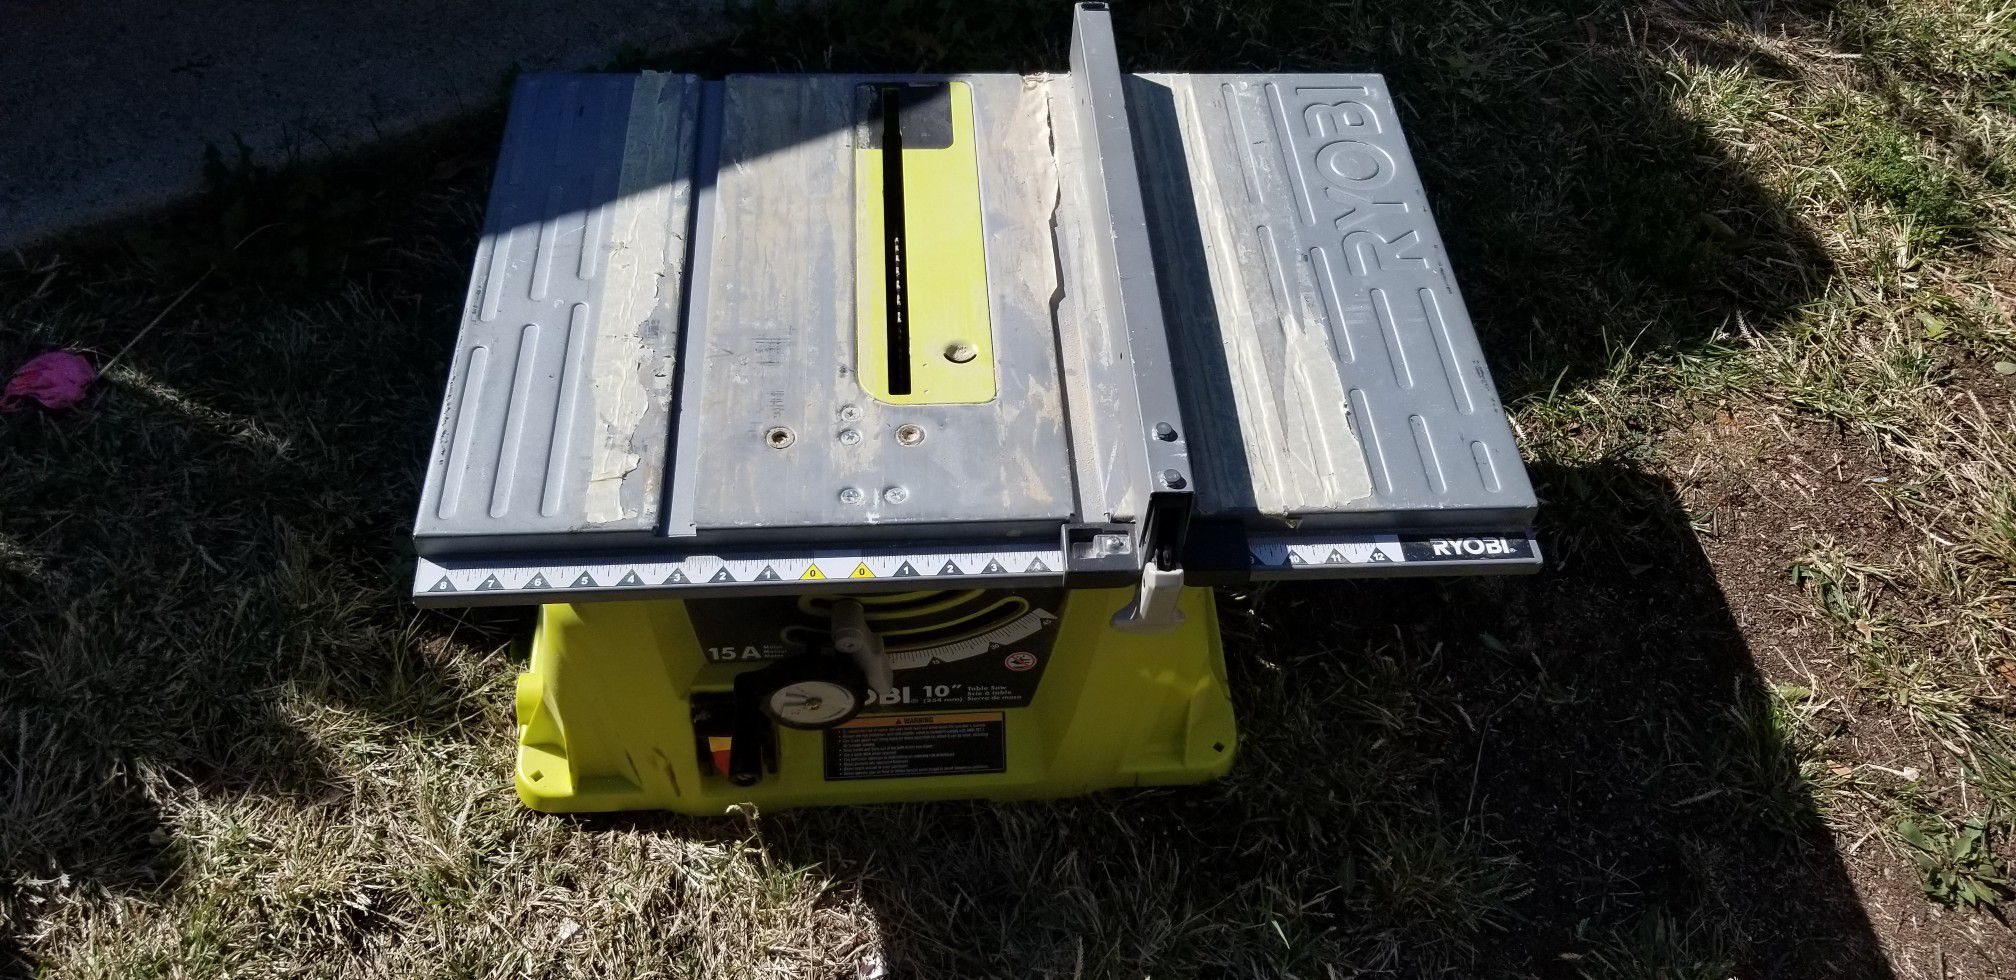 Table saw take it for free